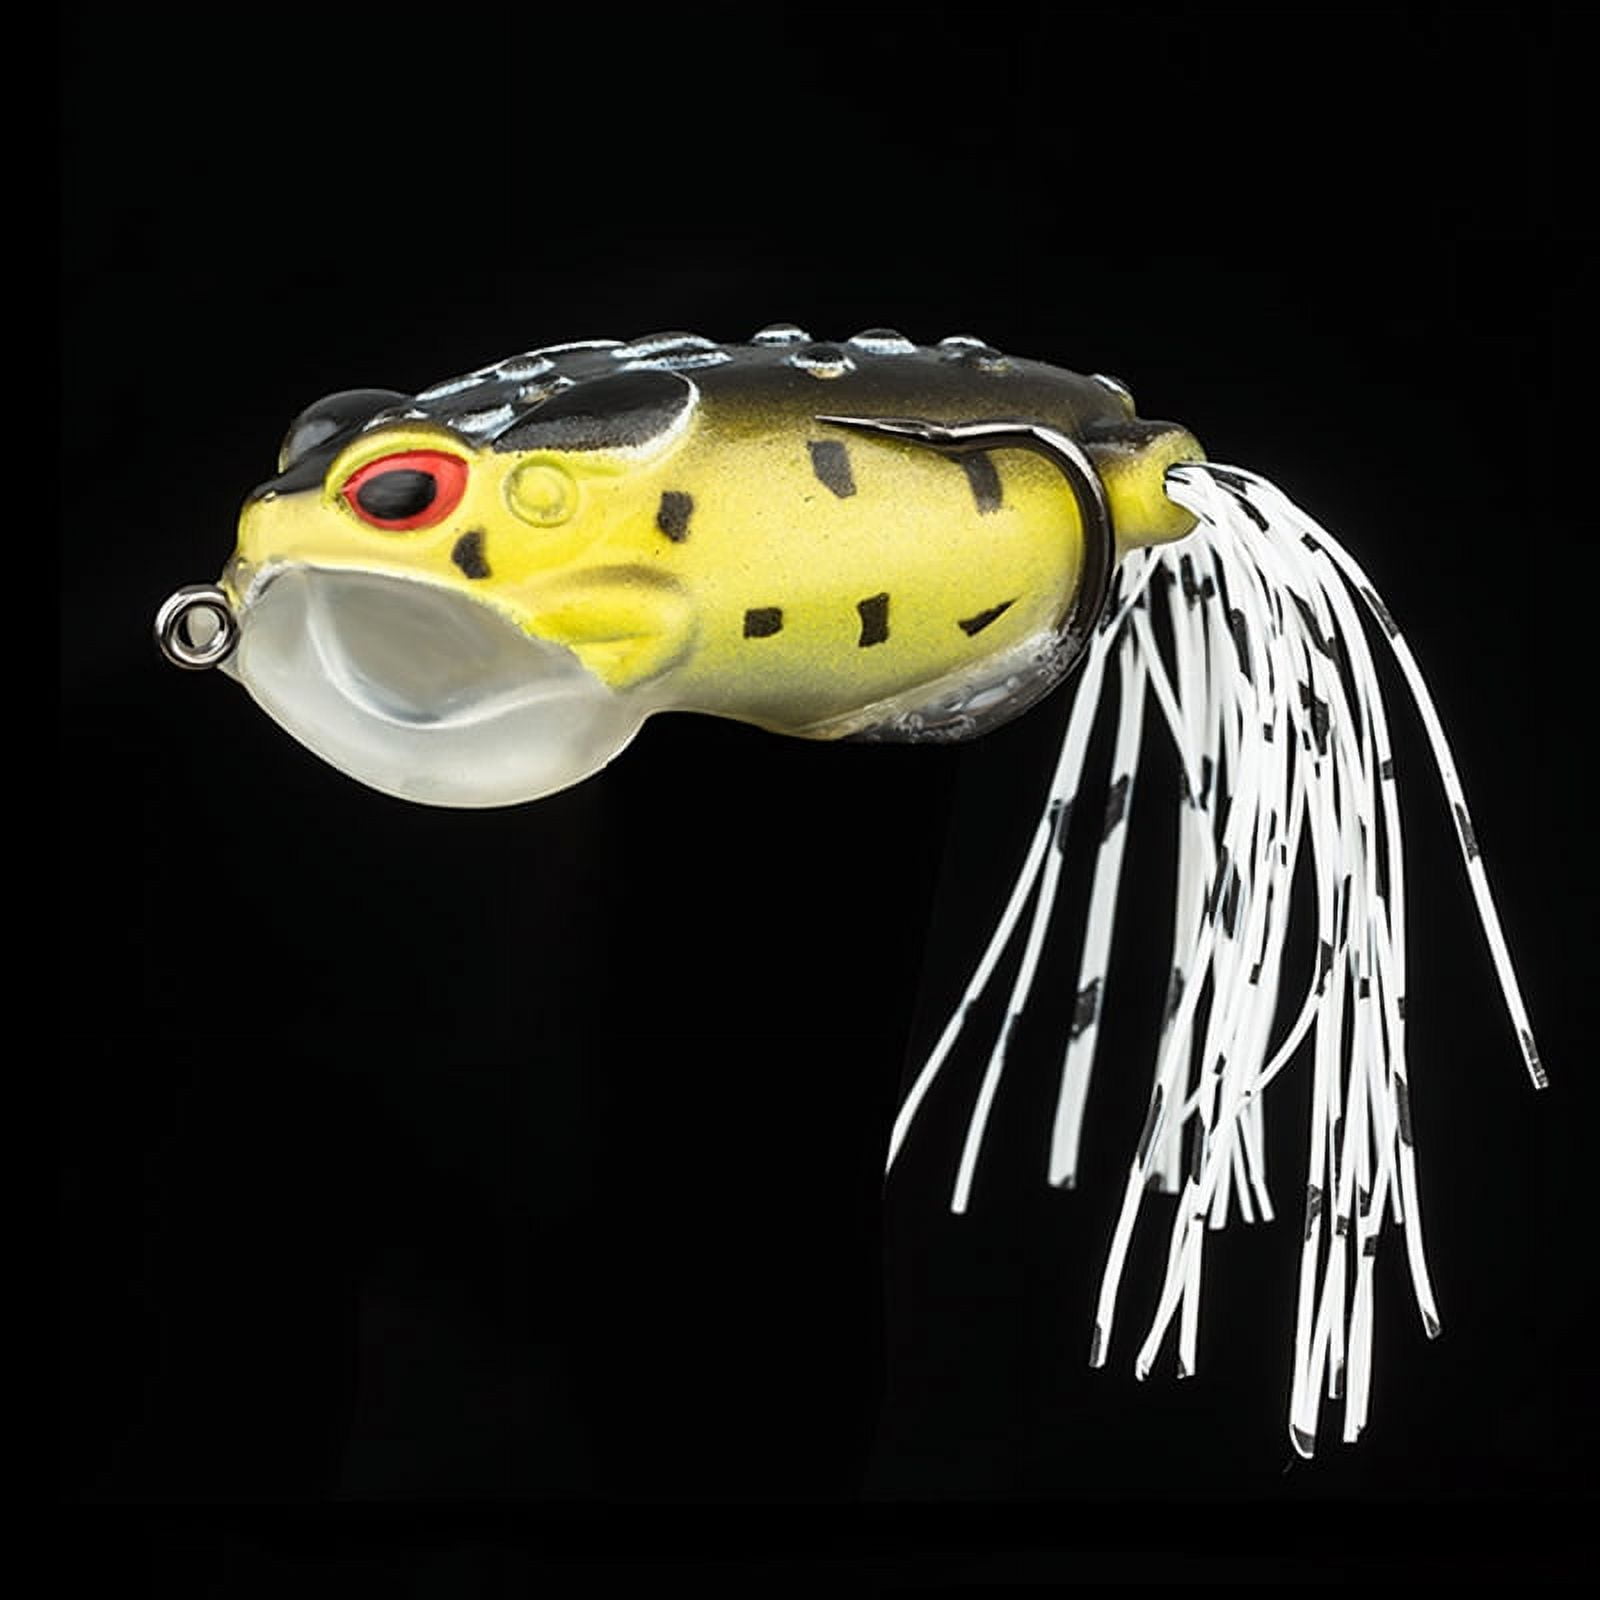 Topwater Frog Lures Soft Frog Baits Weedless Design Lifelike Swimming  Action Fishing Lures New 